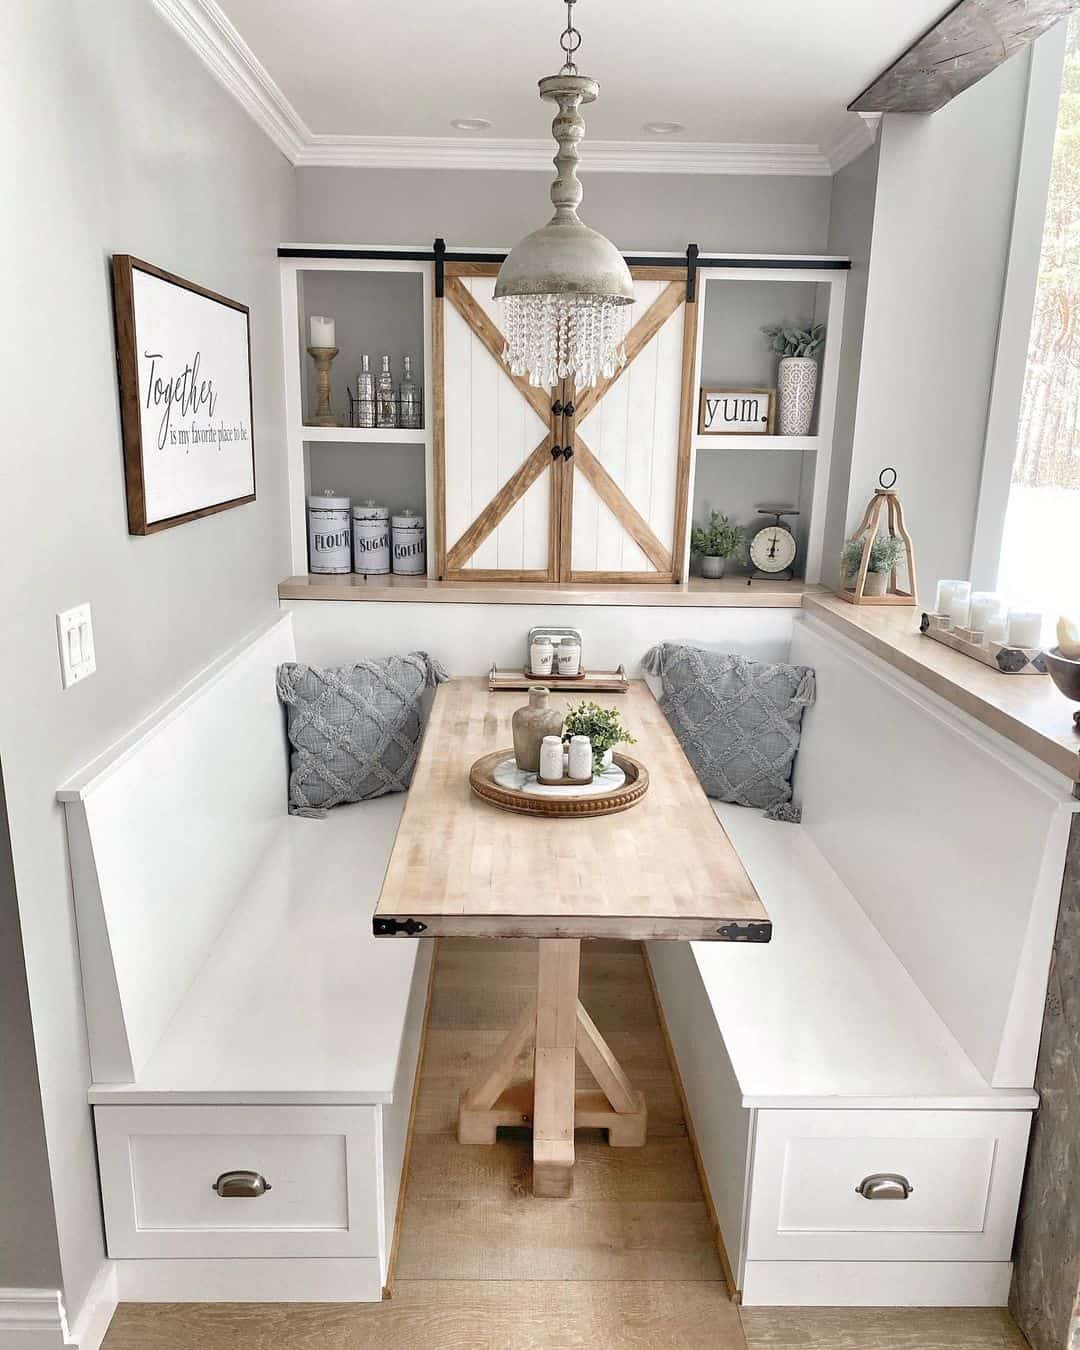 30 Breakfast Nook Ideas for an Inviting Space